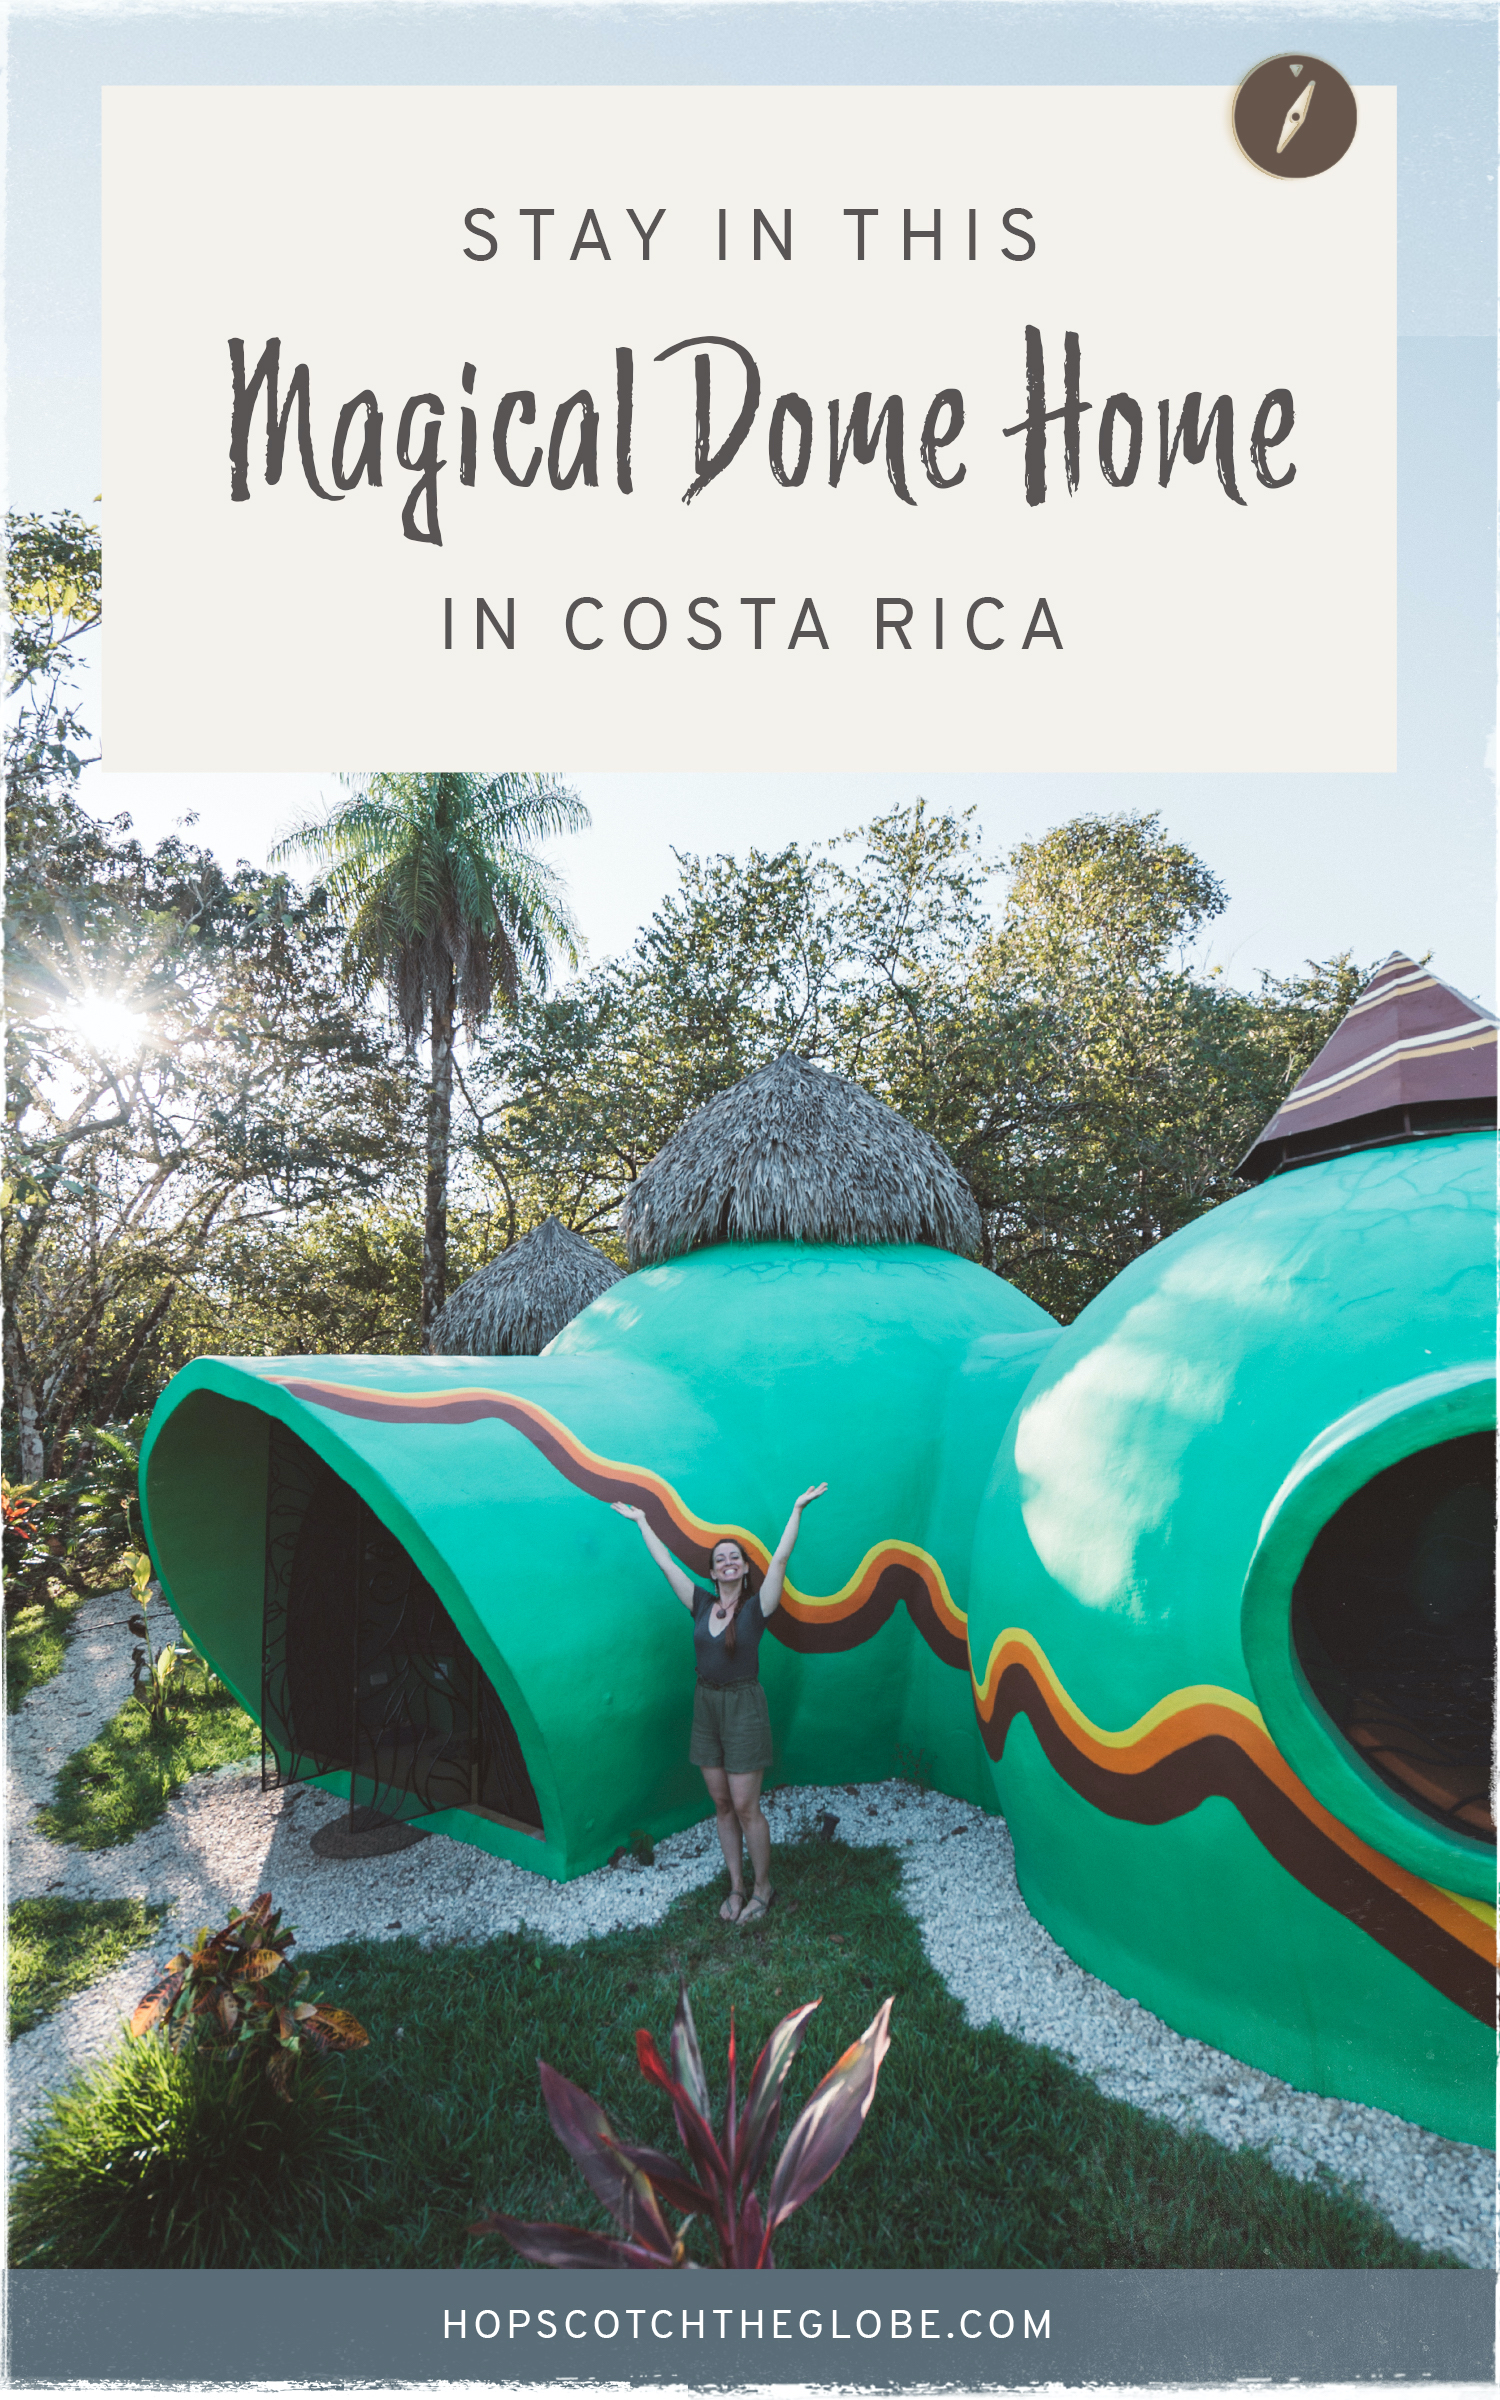 https://hopscotchtheglobe.com/wp-content/uploads/2021/03/Artist-Hosts-Magical-Dome-Airbnb-in-the-Jungles-of-Costa-Rica_4.jpg